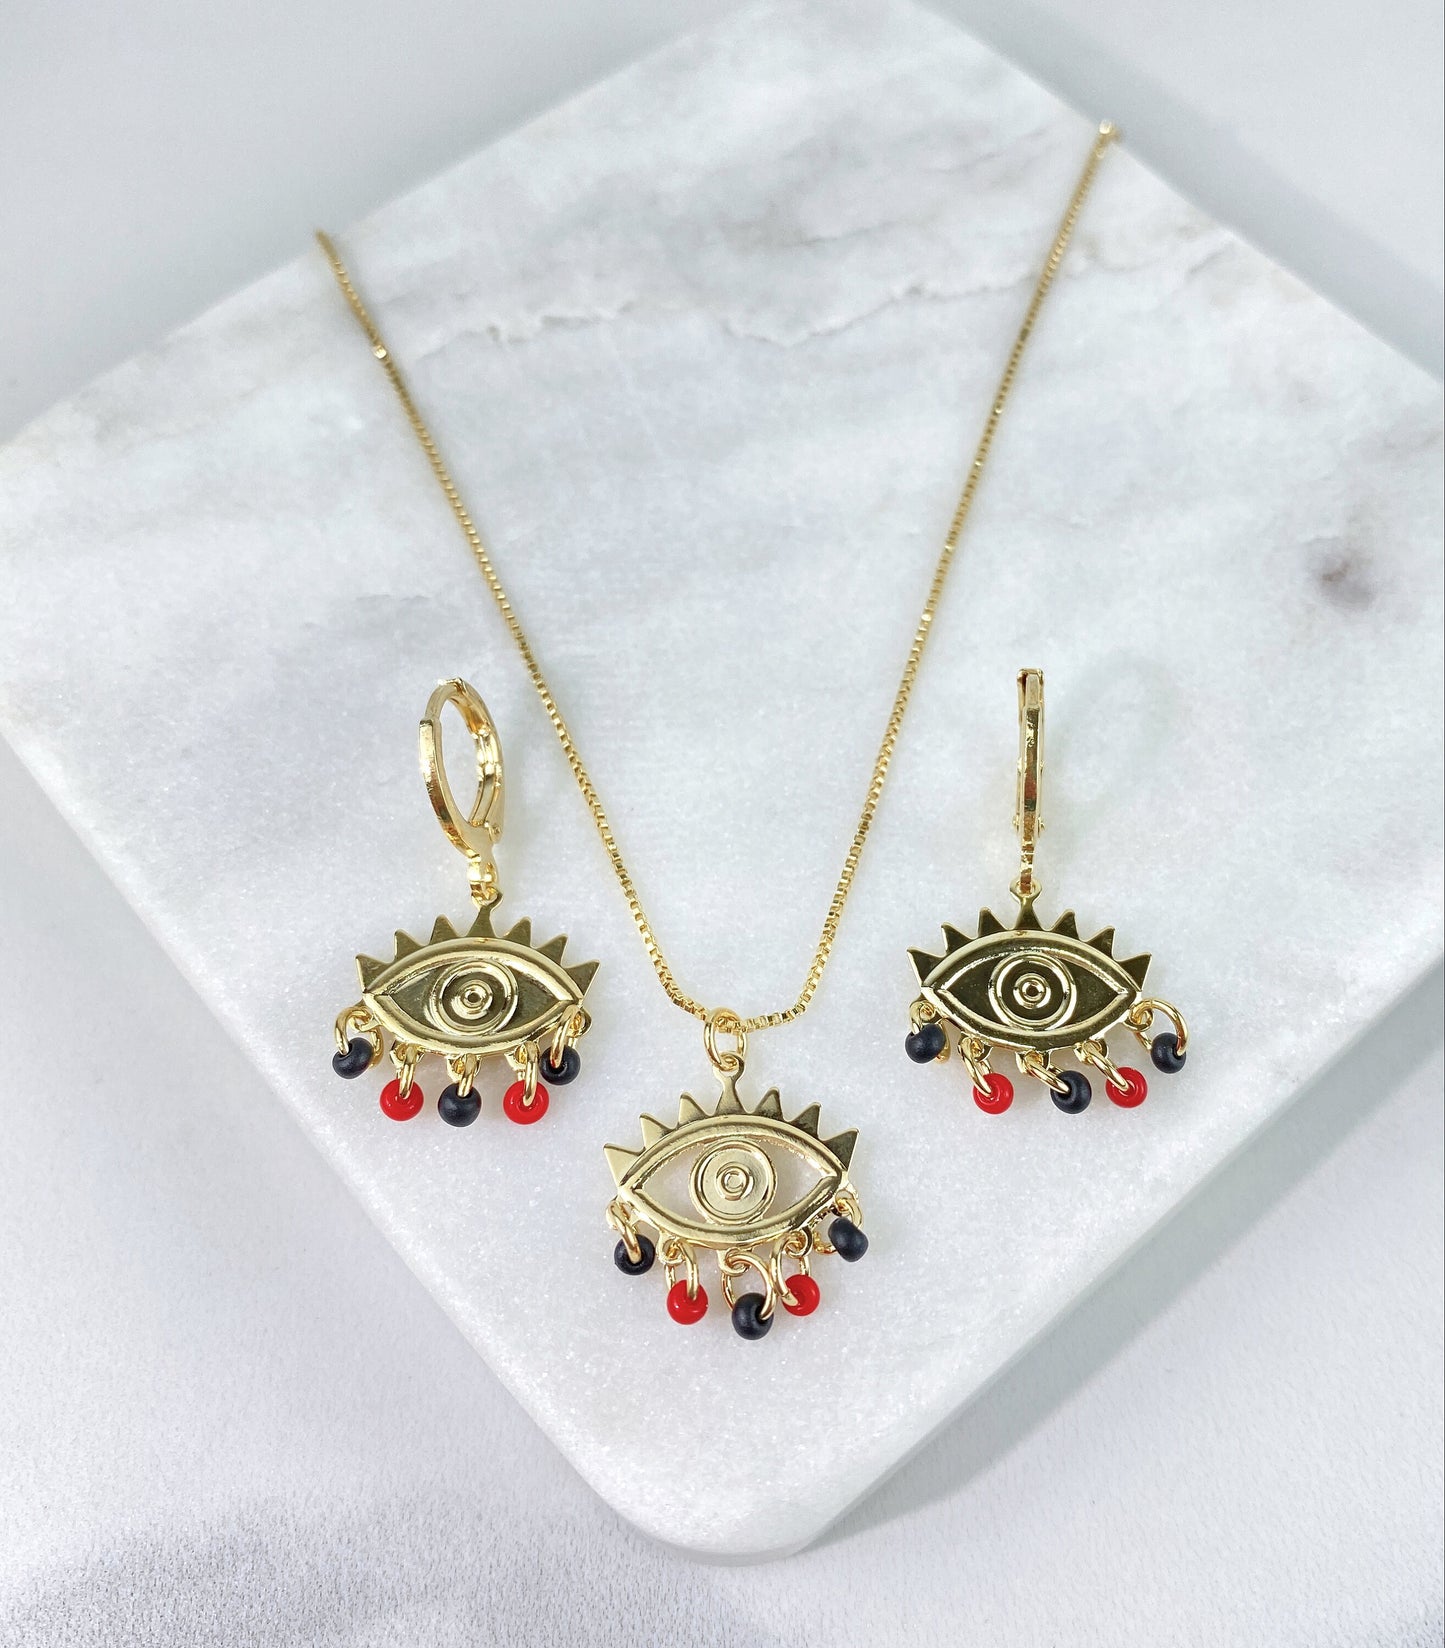 18k Gold Filled 1mm Box Chain, Red and Black Beads, Azabache Style, Evil Eyes Necklace & Earrings Set, Wholesale Jewelry Supplies